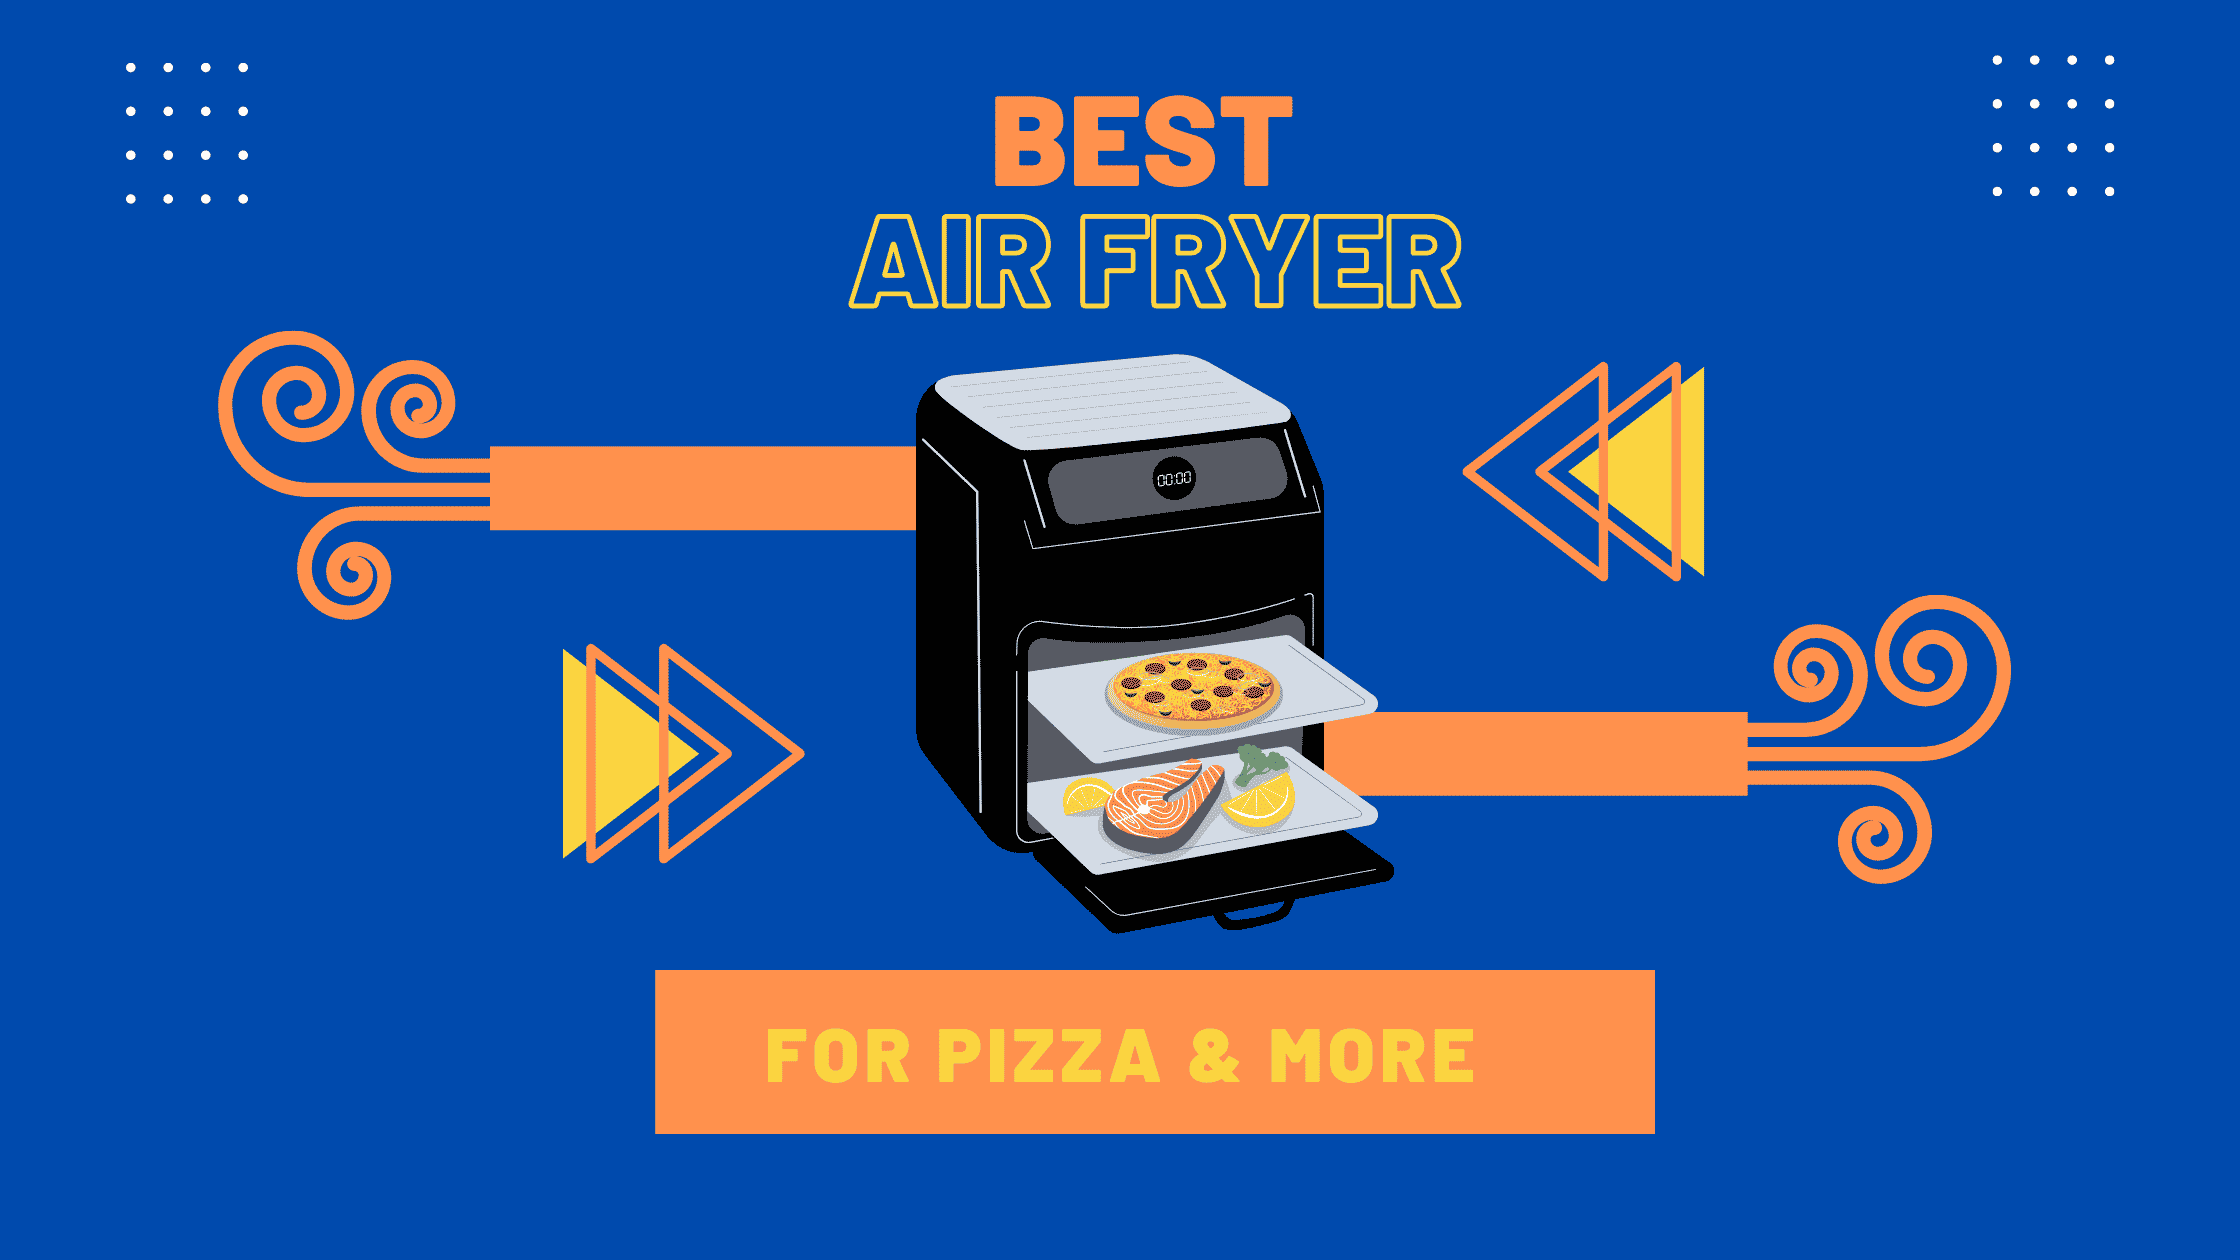 Best Air Fryer for Pizza in 2022